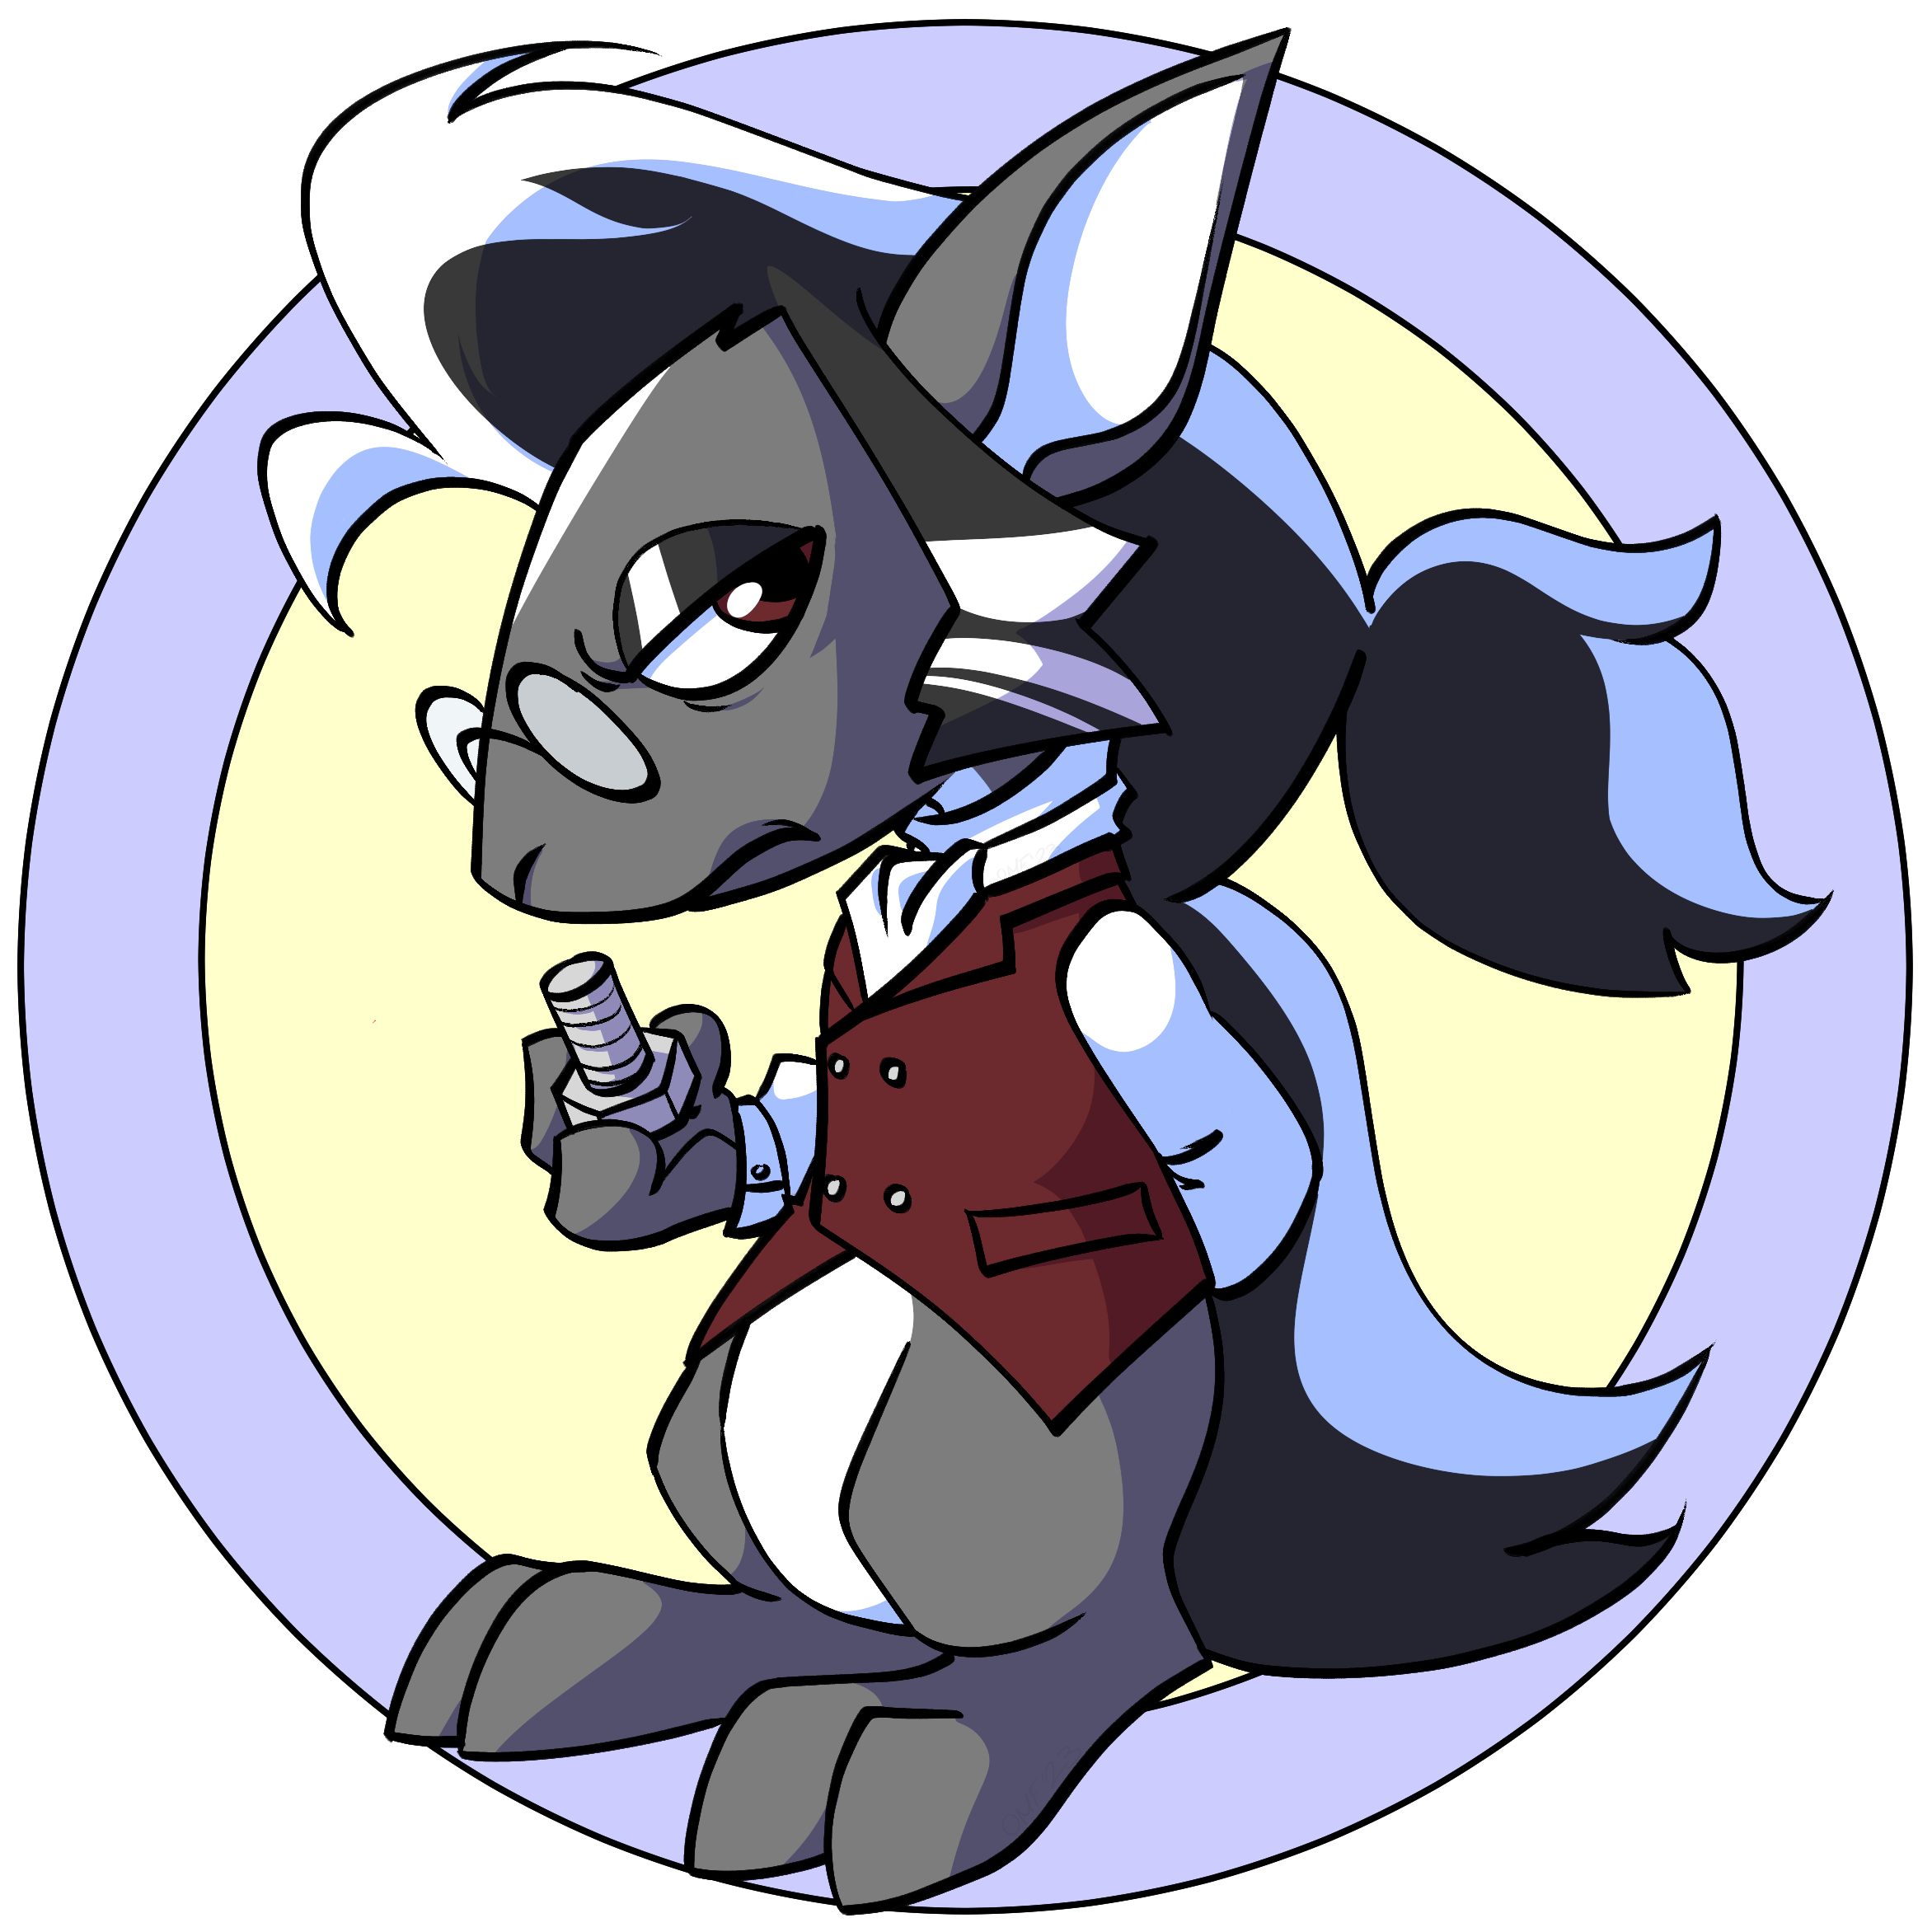 An original overlay for a neopet. The pet in question has grey fur, pointy ears, and big feet. It is holding a bolt in its hand and wears a pair of round glasses and a vest with an ascot. It has long black hair with white streaks, and big bushy sideburns. It is scowling at the right side of the camera.